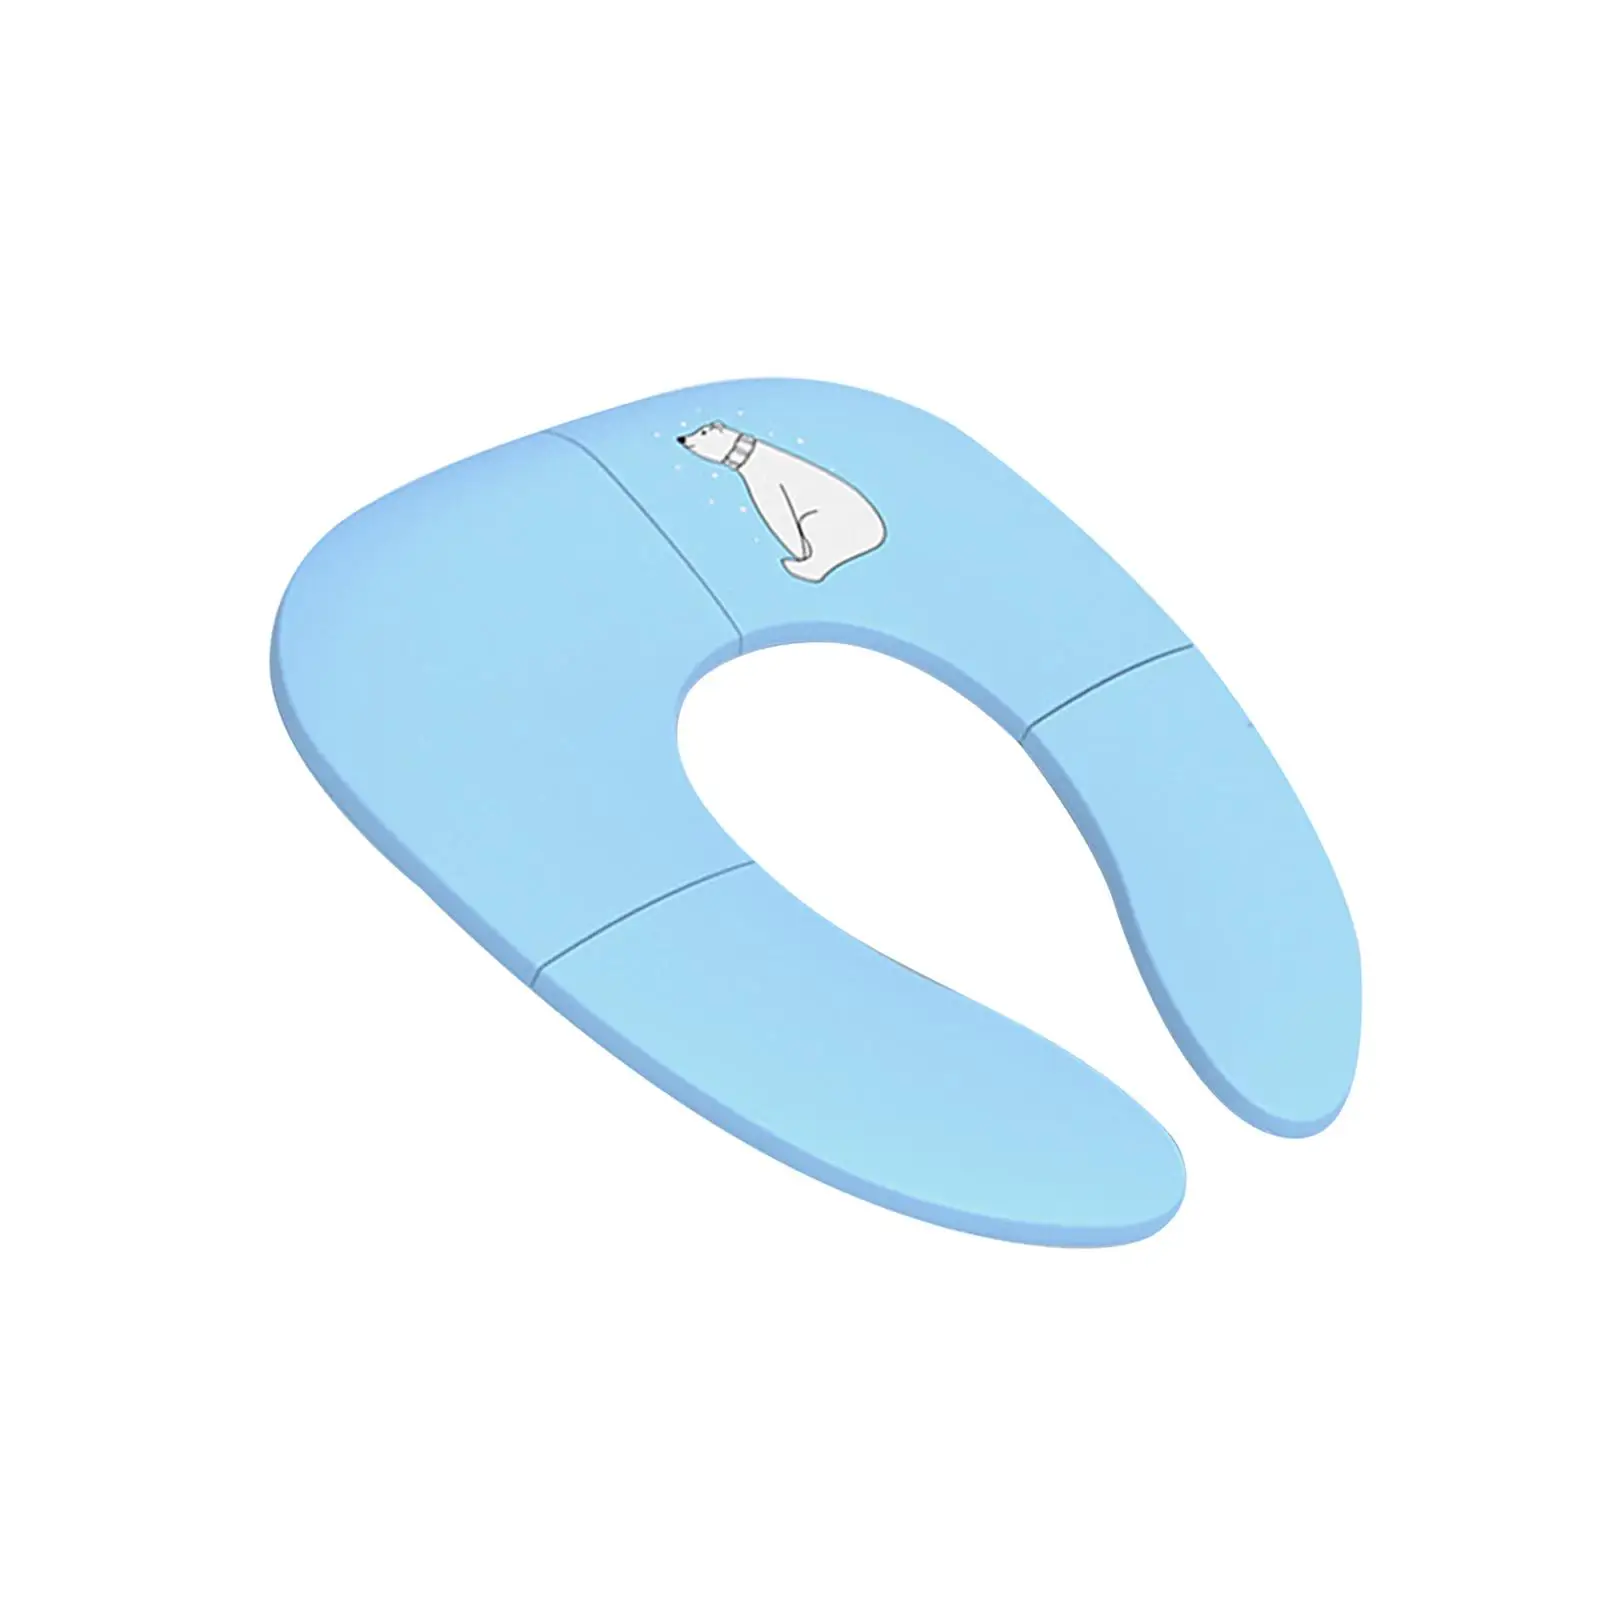 Foldable Toilet Cover Upgraded training Seat Portable Potty Ring Toilet Seat Toilet Cushion child Toddler Baby Kids